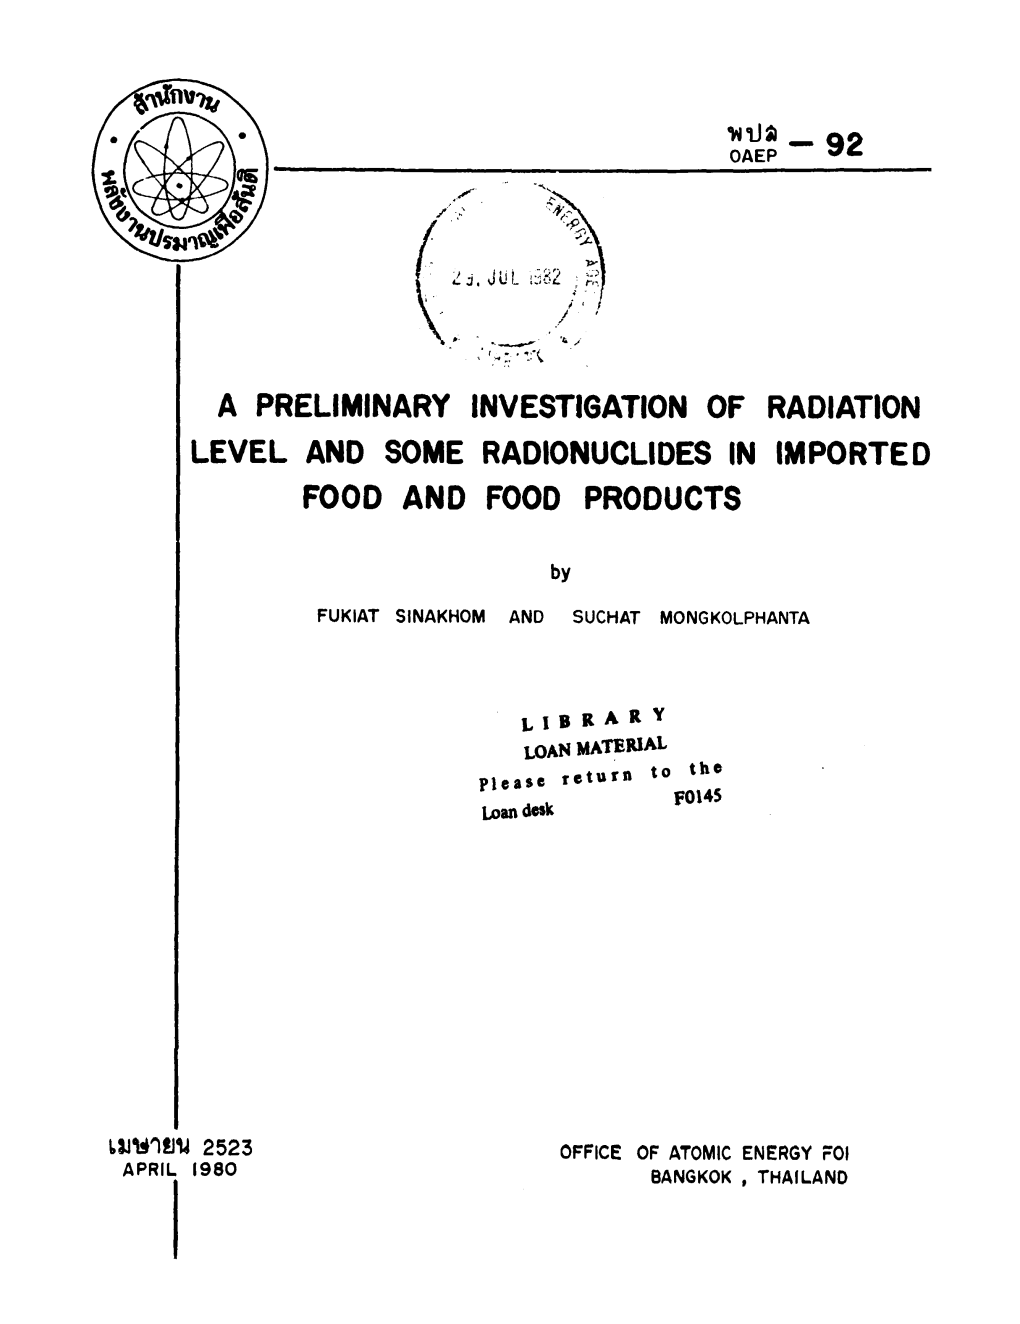 A Preliminary Investigation of Radiation Level and Some Radionuclides in Imported Food and Food Products